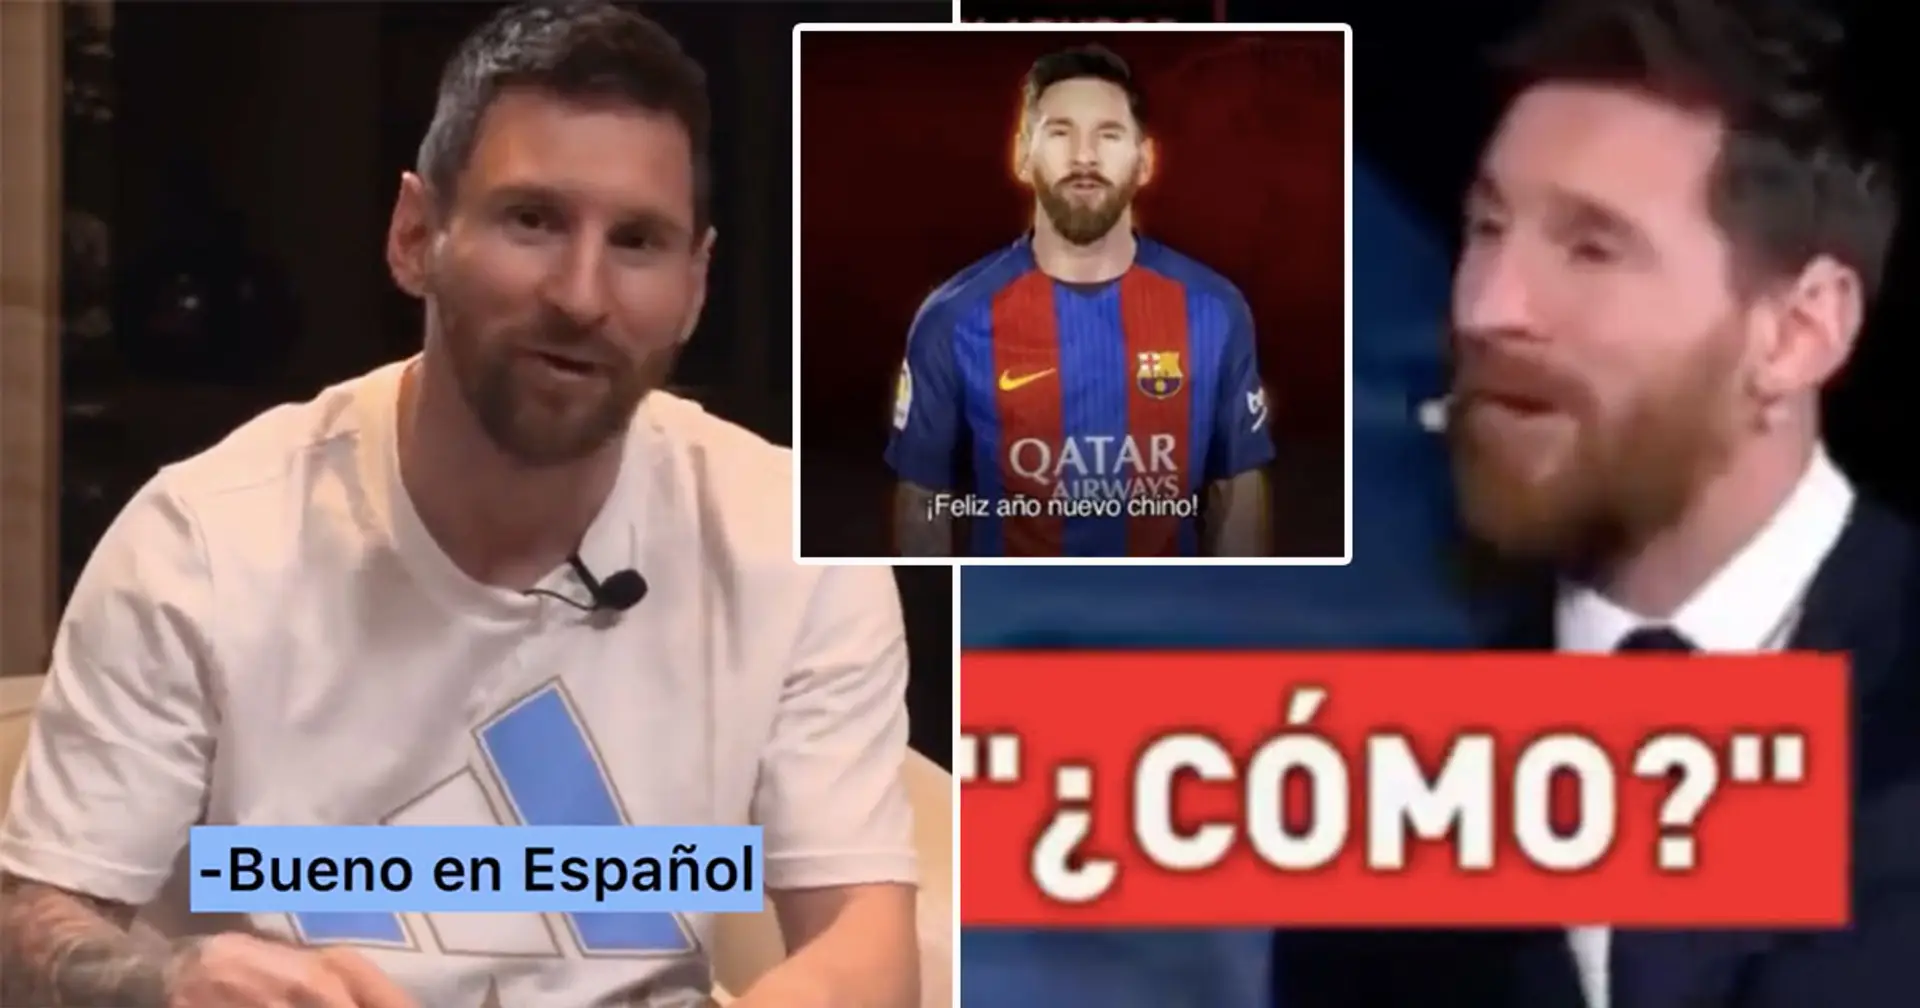 Lionel Messi hates speaking any language except Spanish - here are failed attempts to make him polyglot